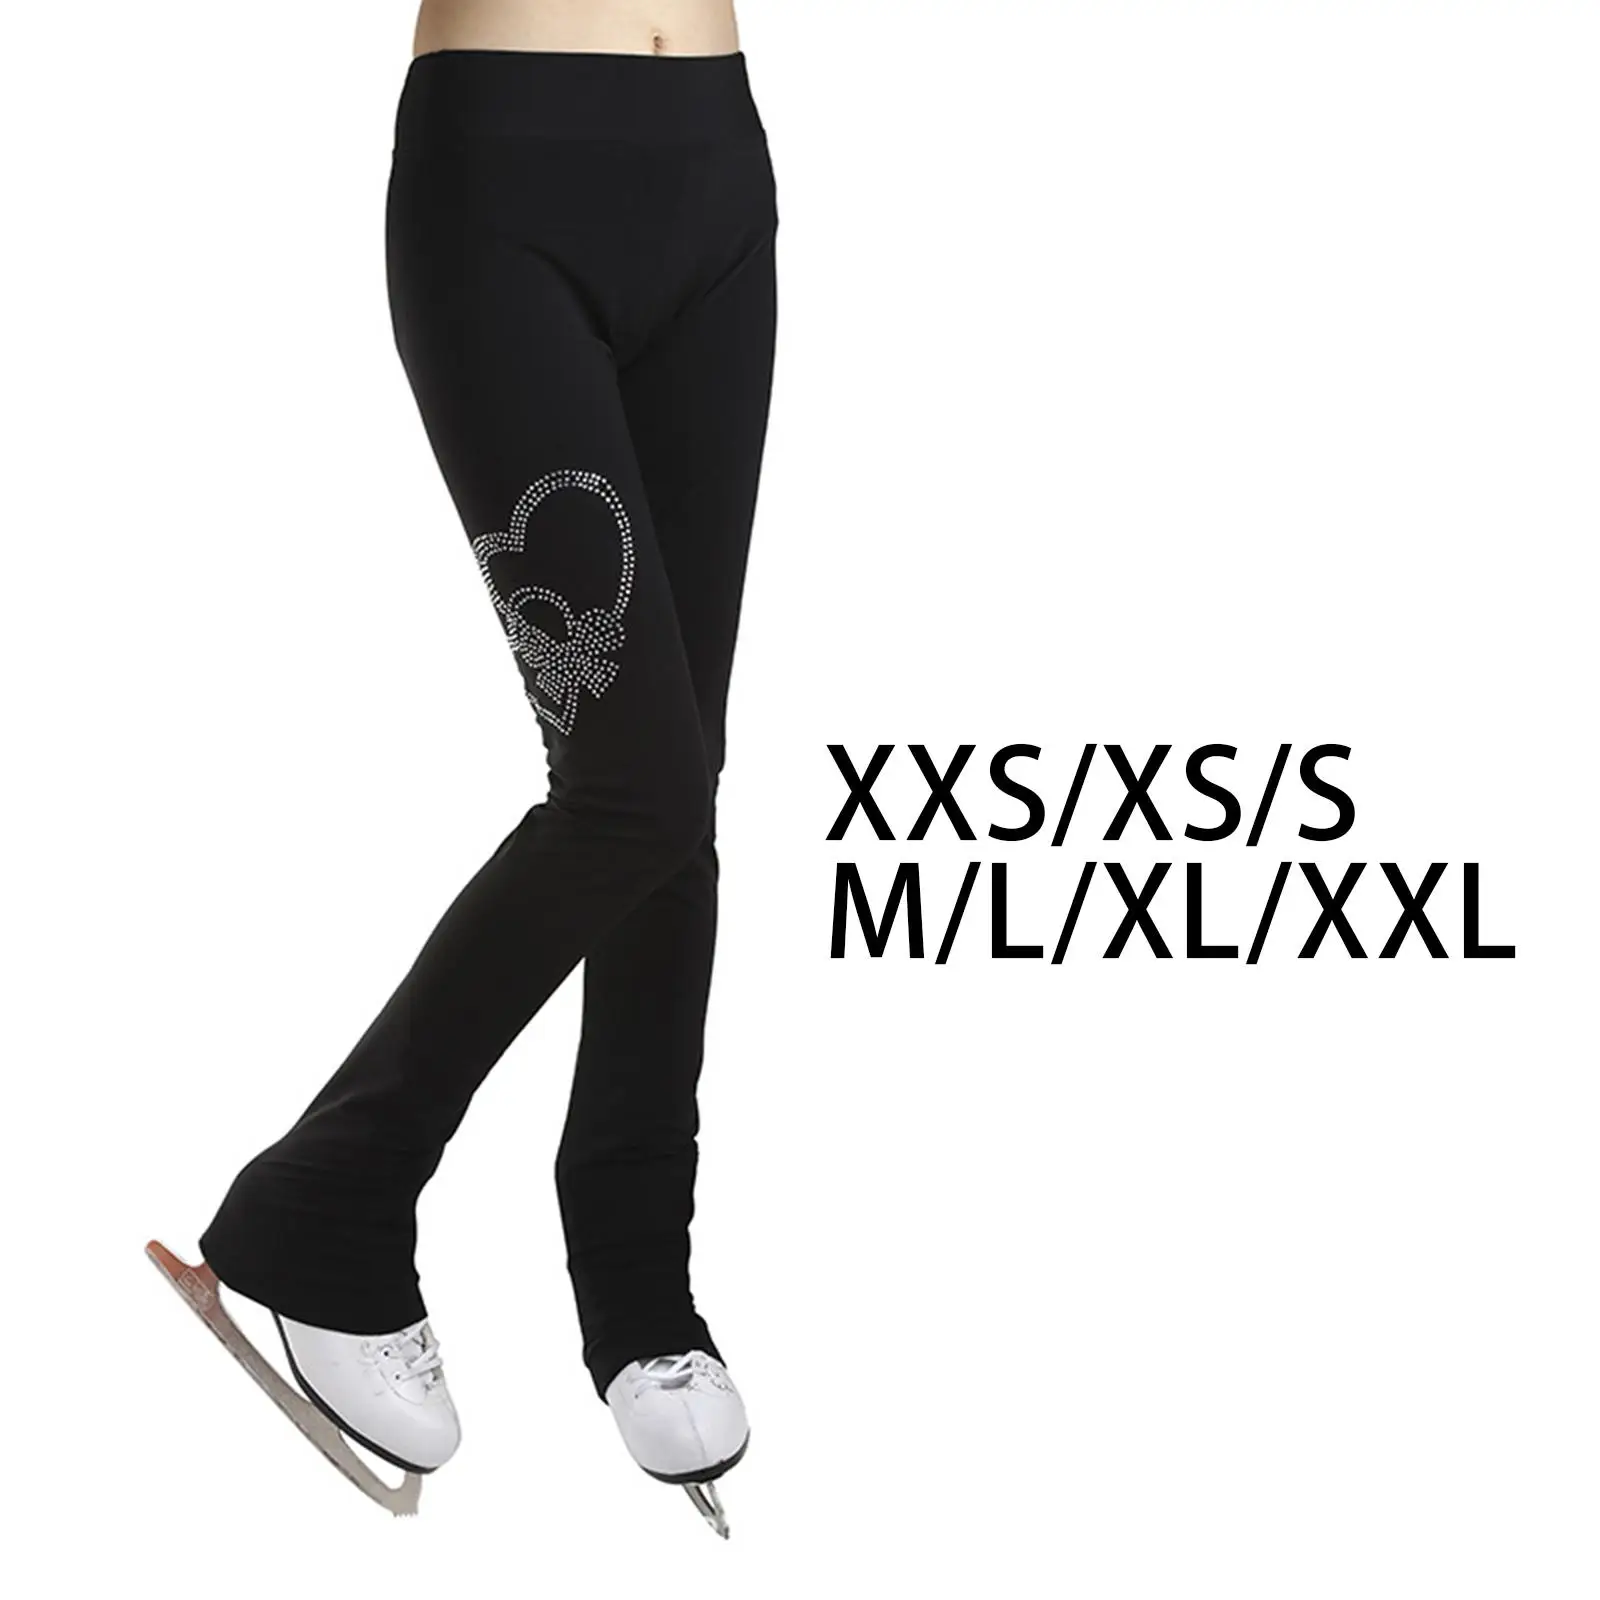 Figure Skating Pants Thickening Leggings Trousers Thermal Over The Boot Tights for Performances Pantyhose Gymnastics Practice